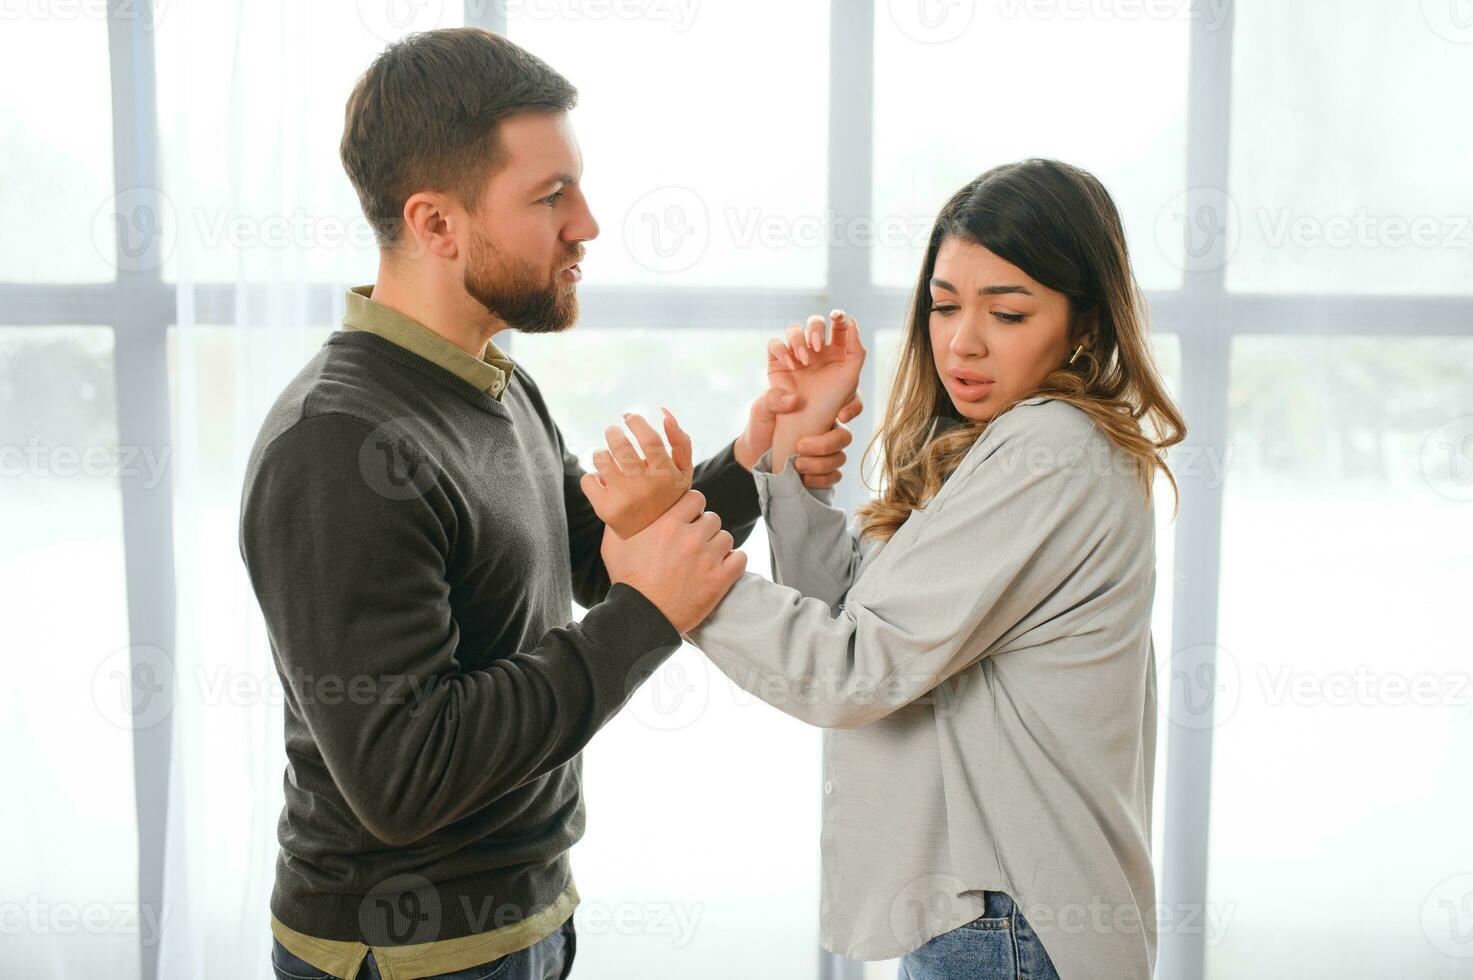 Man beating up his wife illustrating domestic violence photo